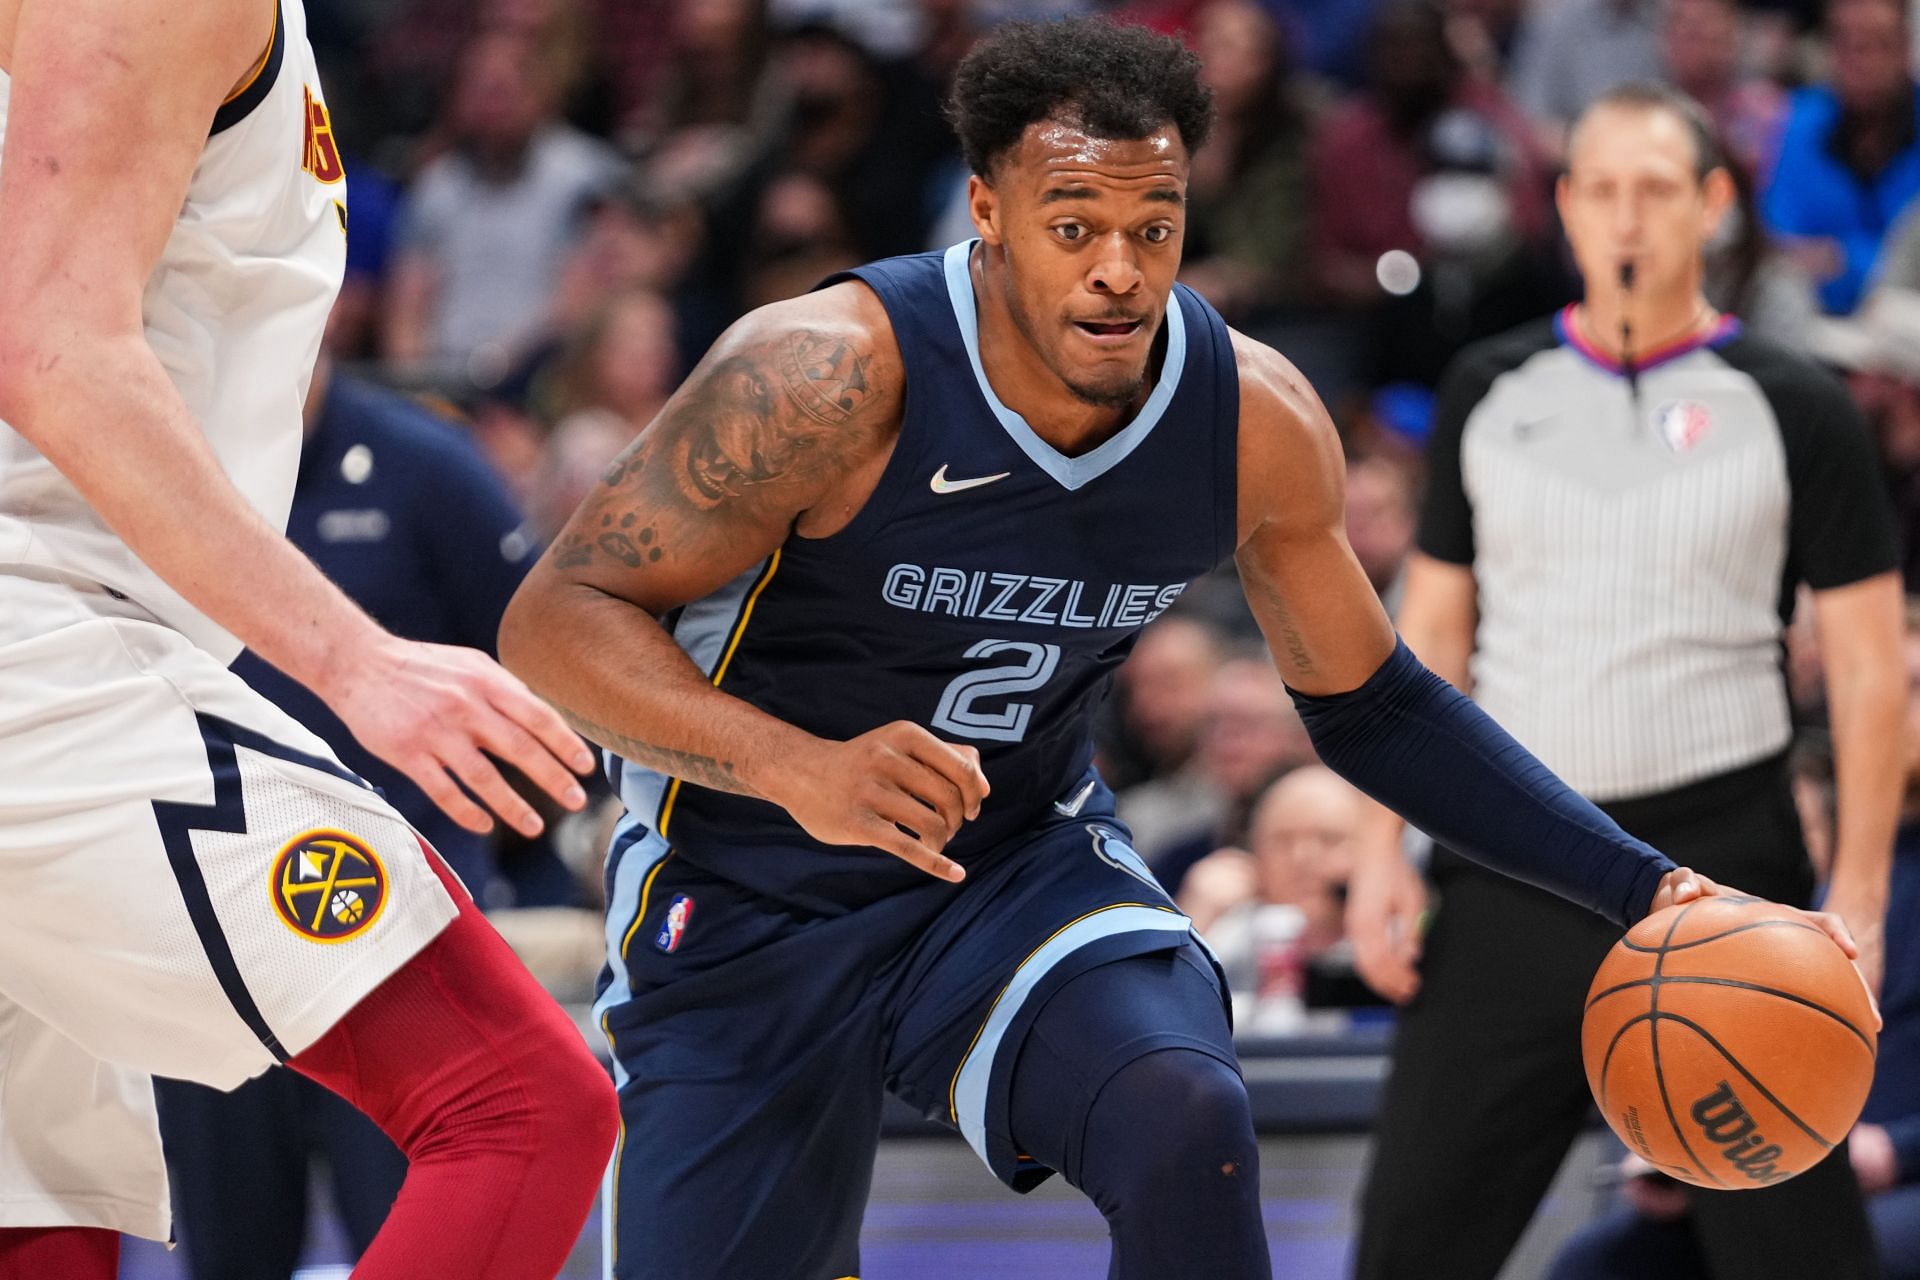 The Memphis Grizzlies will seek to regain their balance after a disappointing defeat in the first game